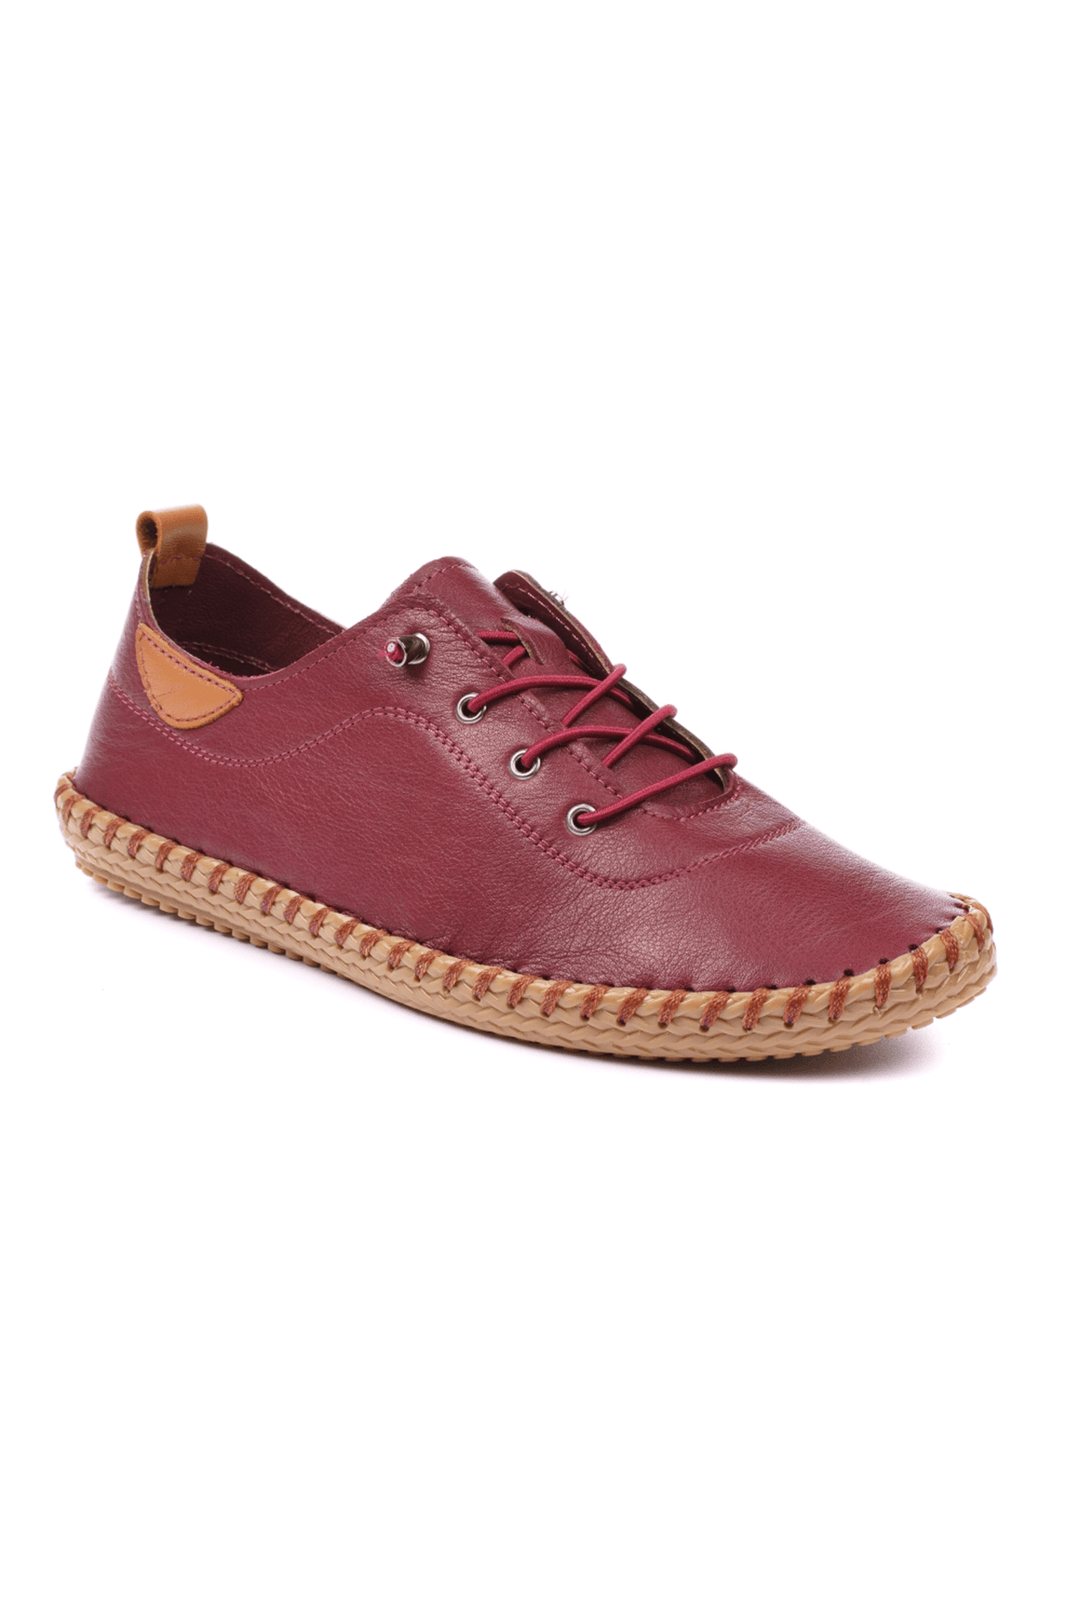 Lunar Whitstable FLG019 Leather Burgundy Plimsoll - Shirley Allum Boutique